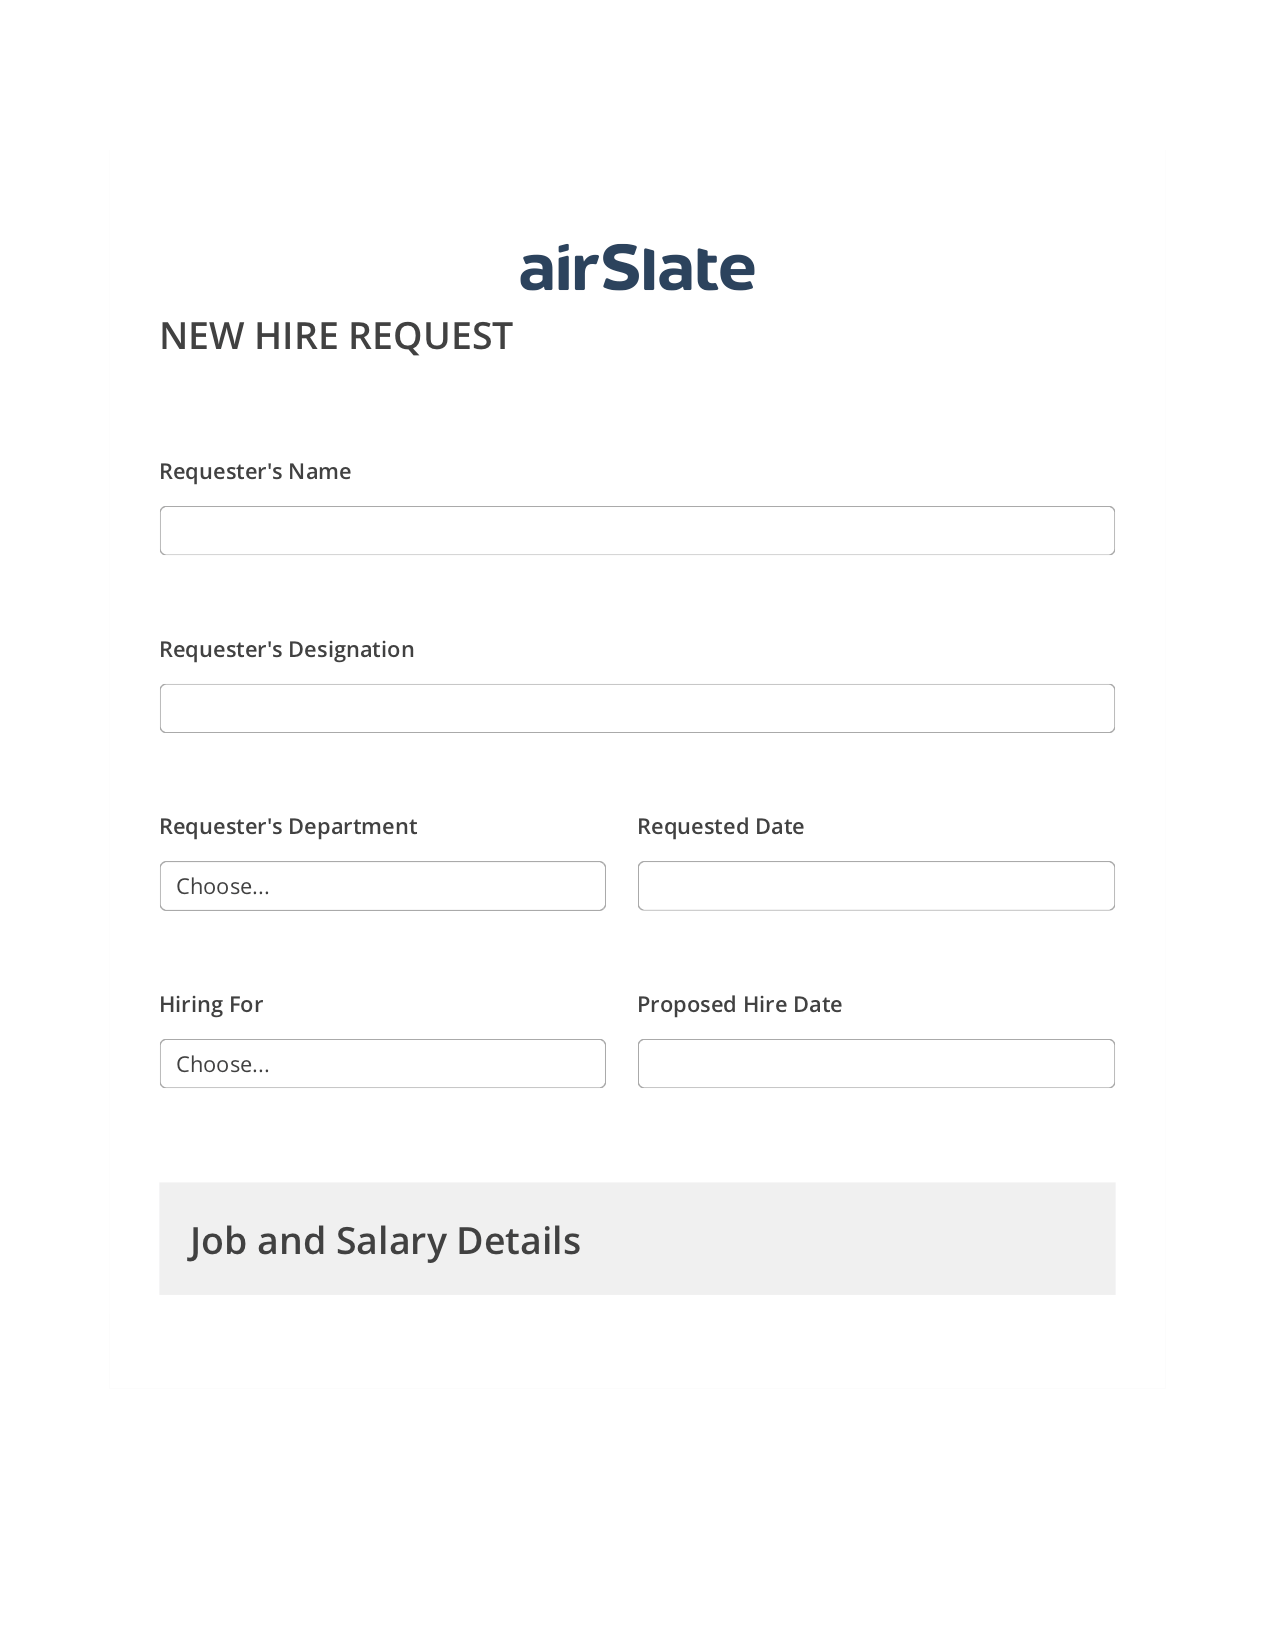 Multirole Hiring Request Workflow Pre-fill Dropdowns from CSV file Bot, Update NetSuite Record Bot, Archive to Dropbox Bot